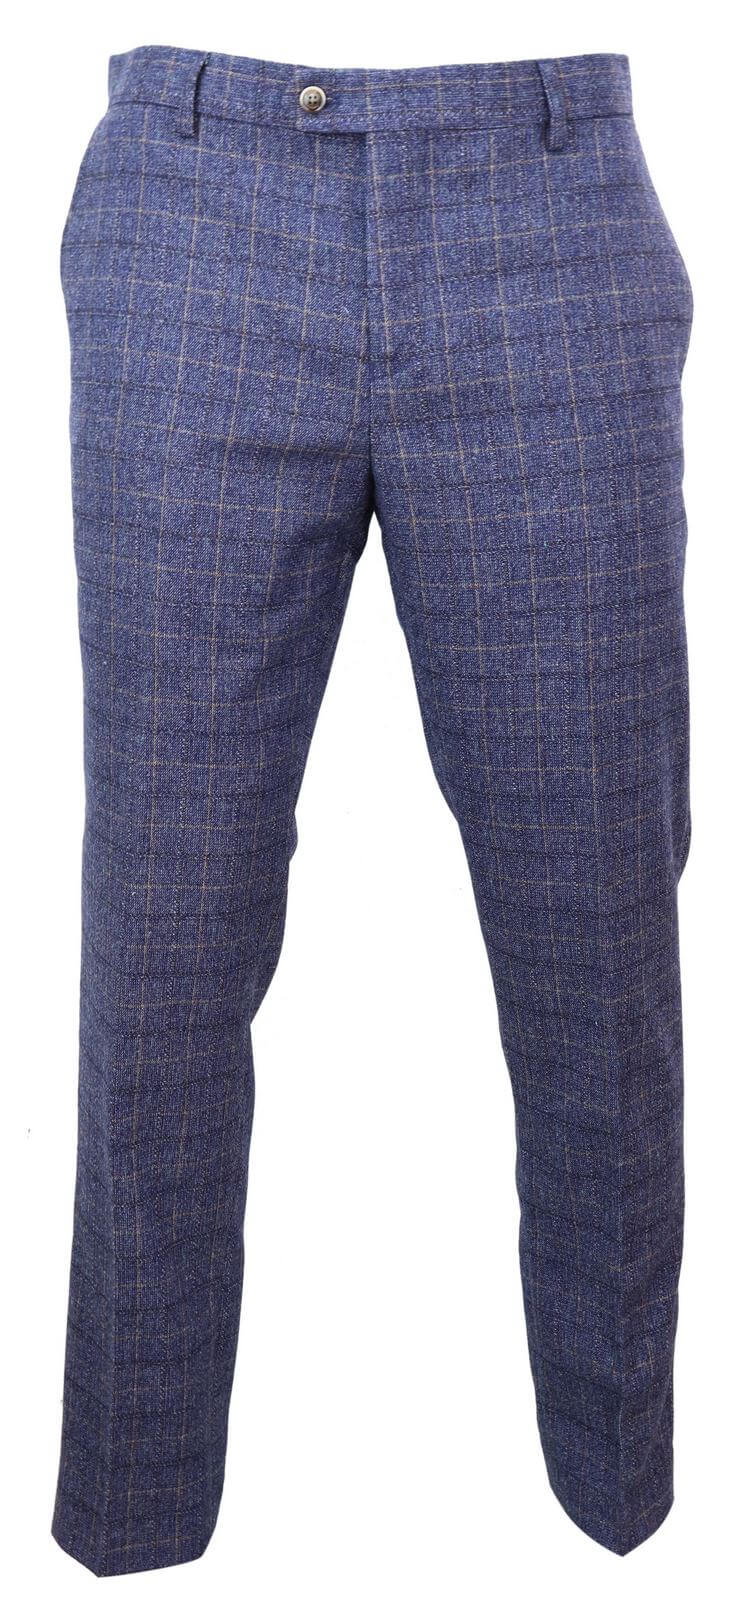 Mens Check Plaid Pants Trousers Slim Fit Casual Business Work Pants Bottoms  | eBay